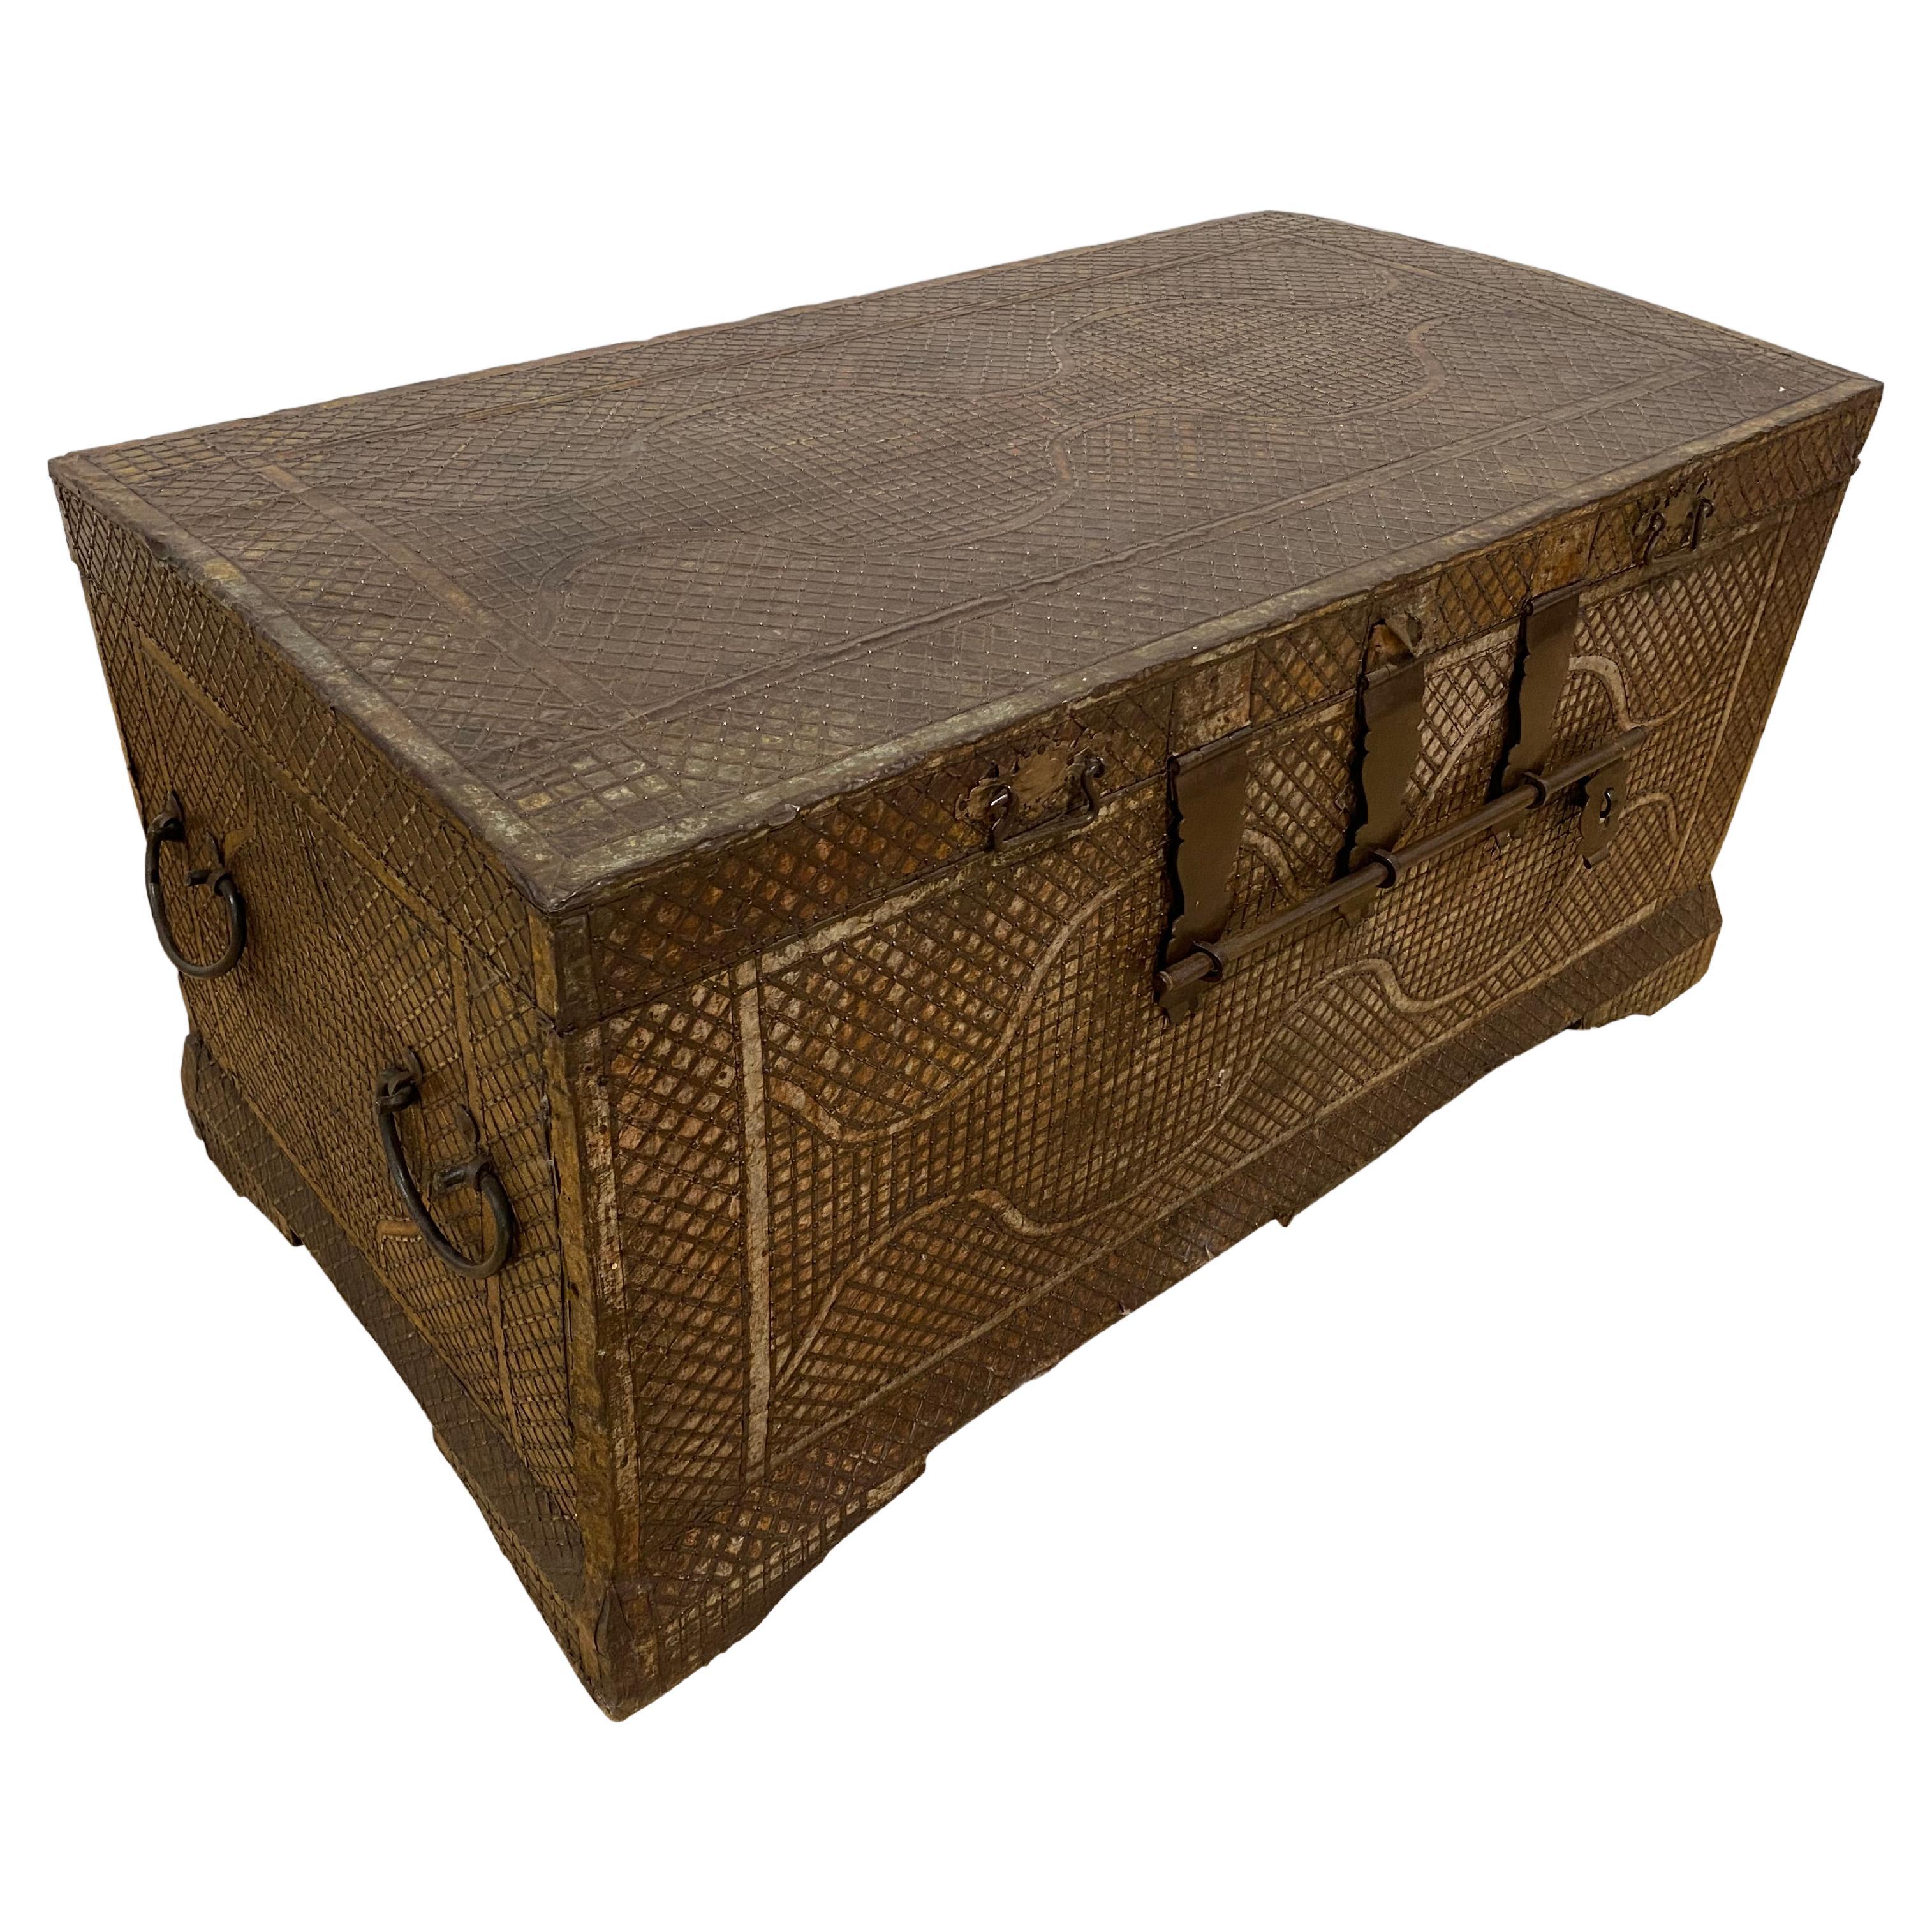 19th Century Colonial Travelling Chest or Trunk